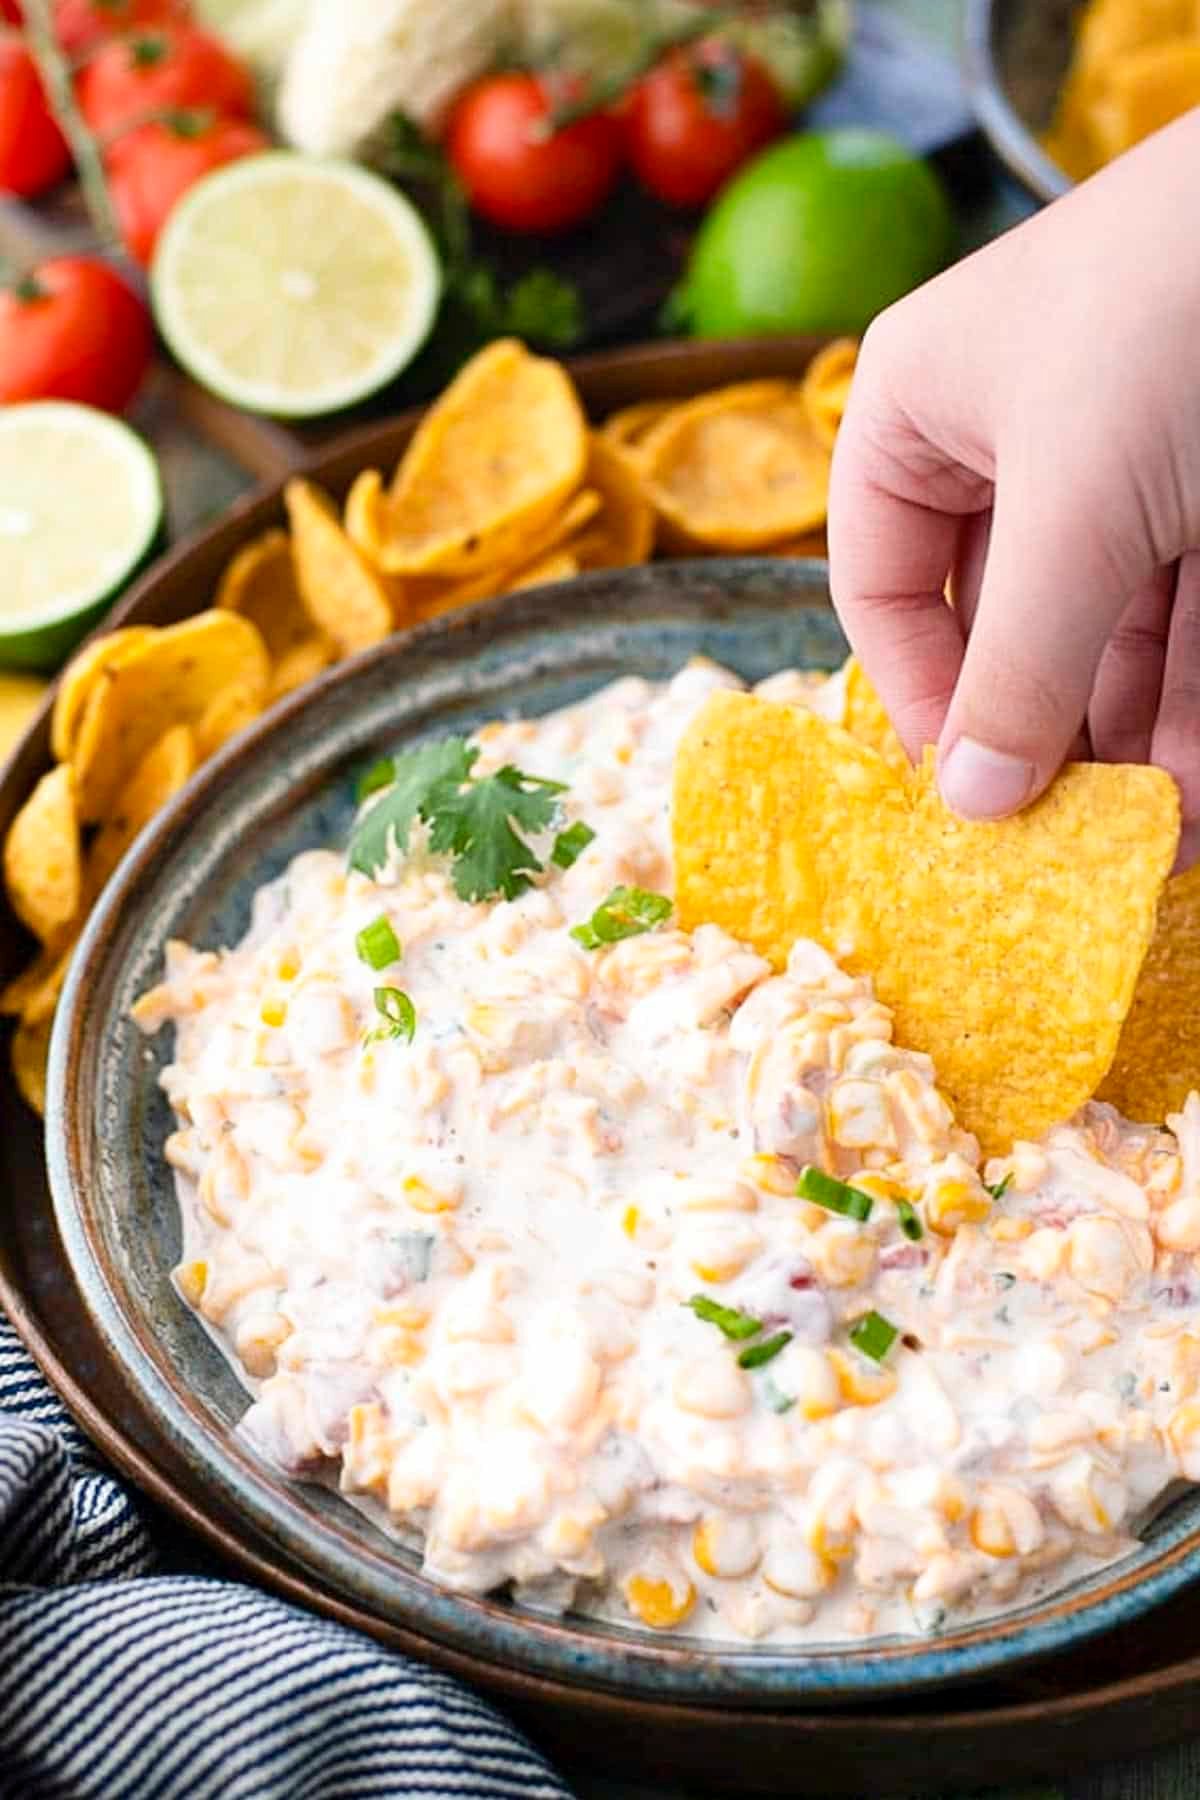 Hand scooping up cold corn dip with a tortilla chip.